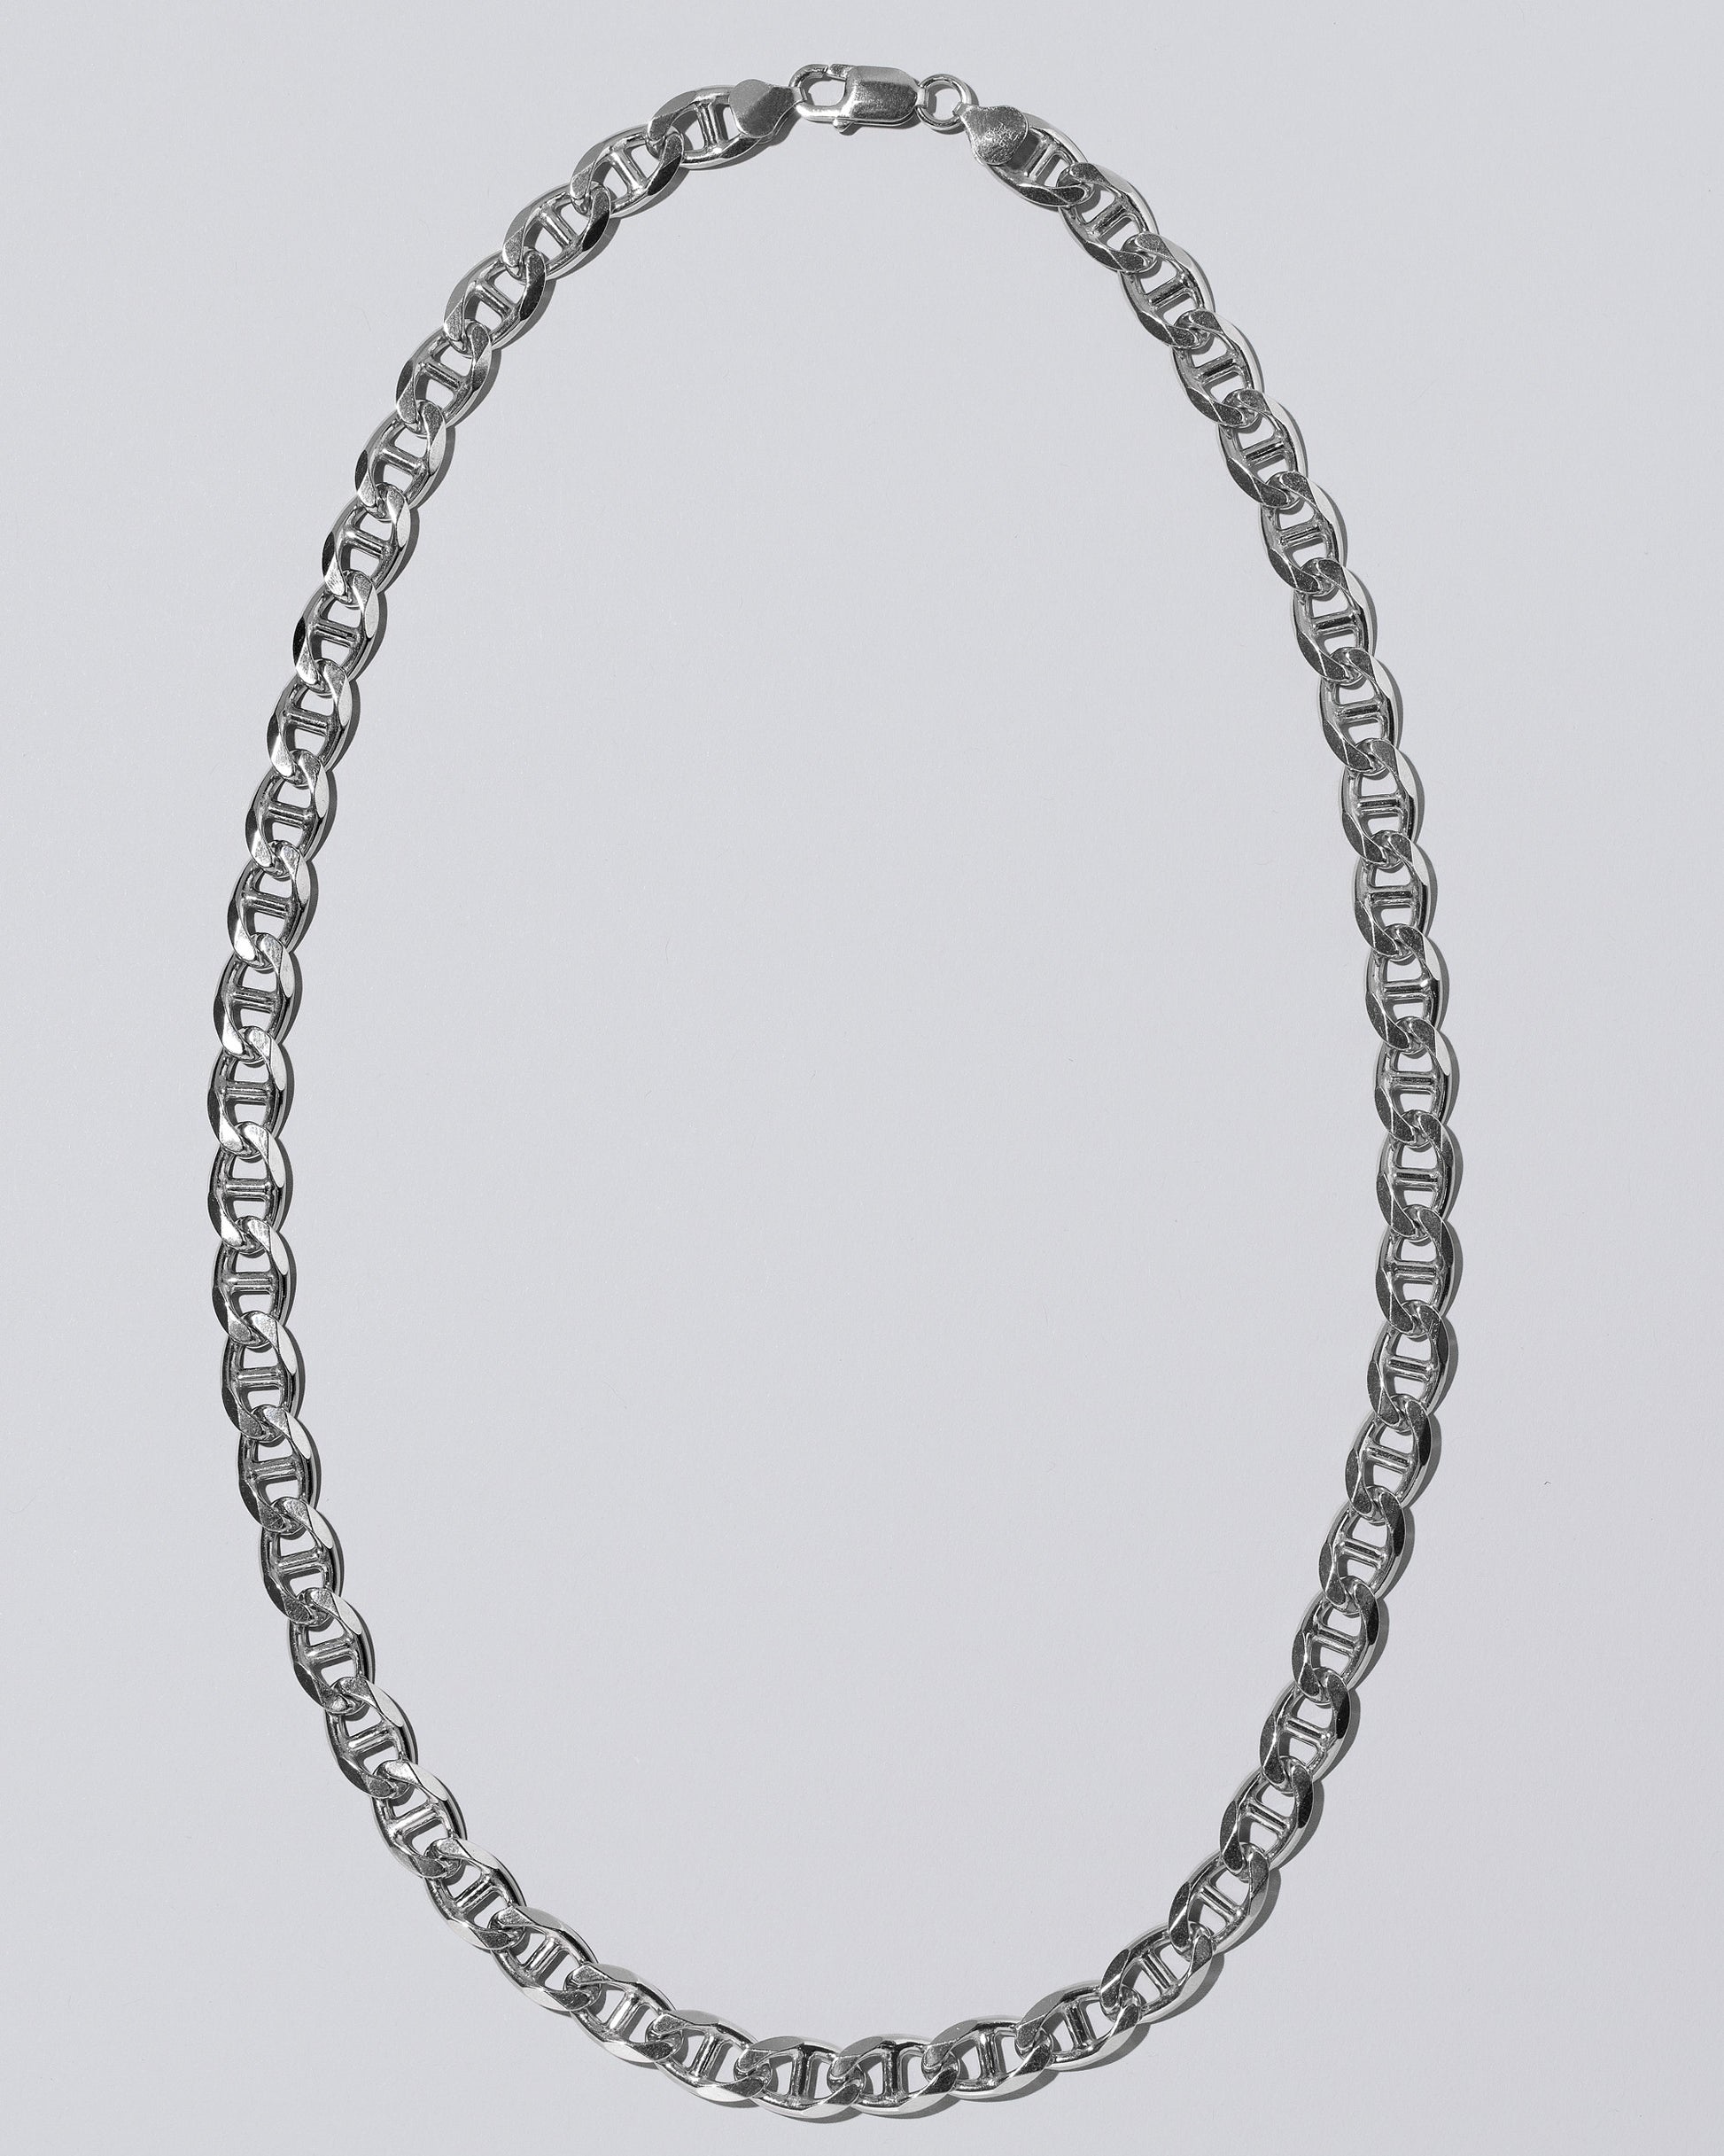 Silver Mariner Chain on light color background.